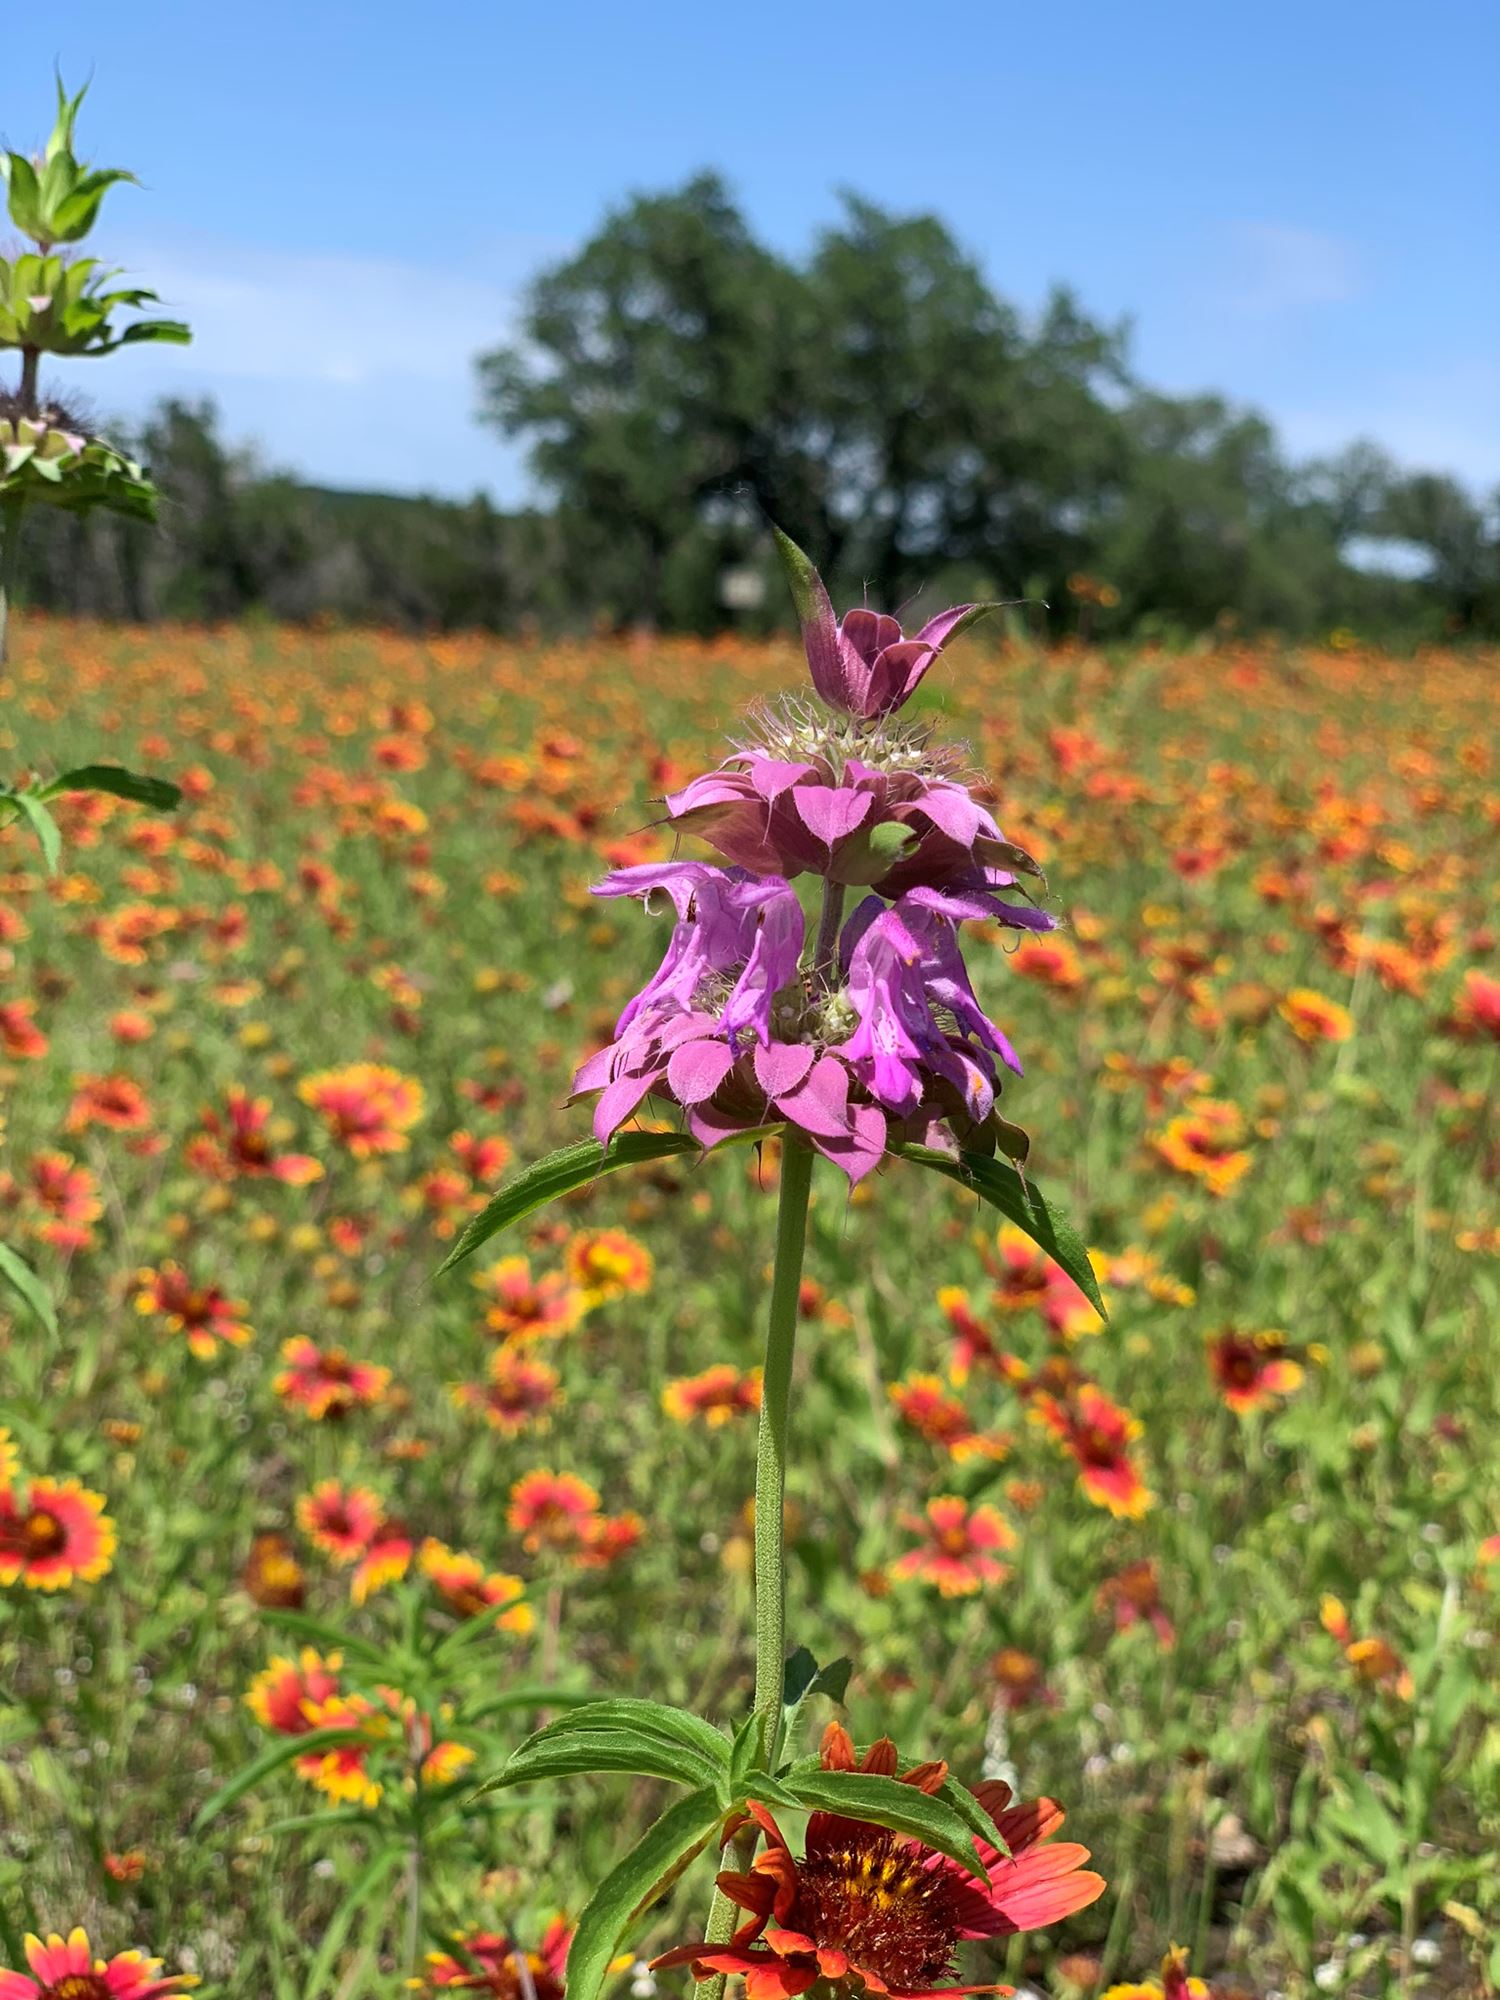 Discover The Best Wildflowers In The Texas Hill Country In Dripping Springs Tx